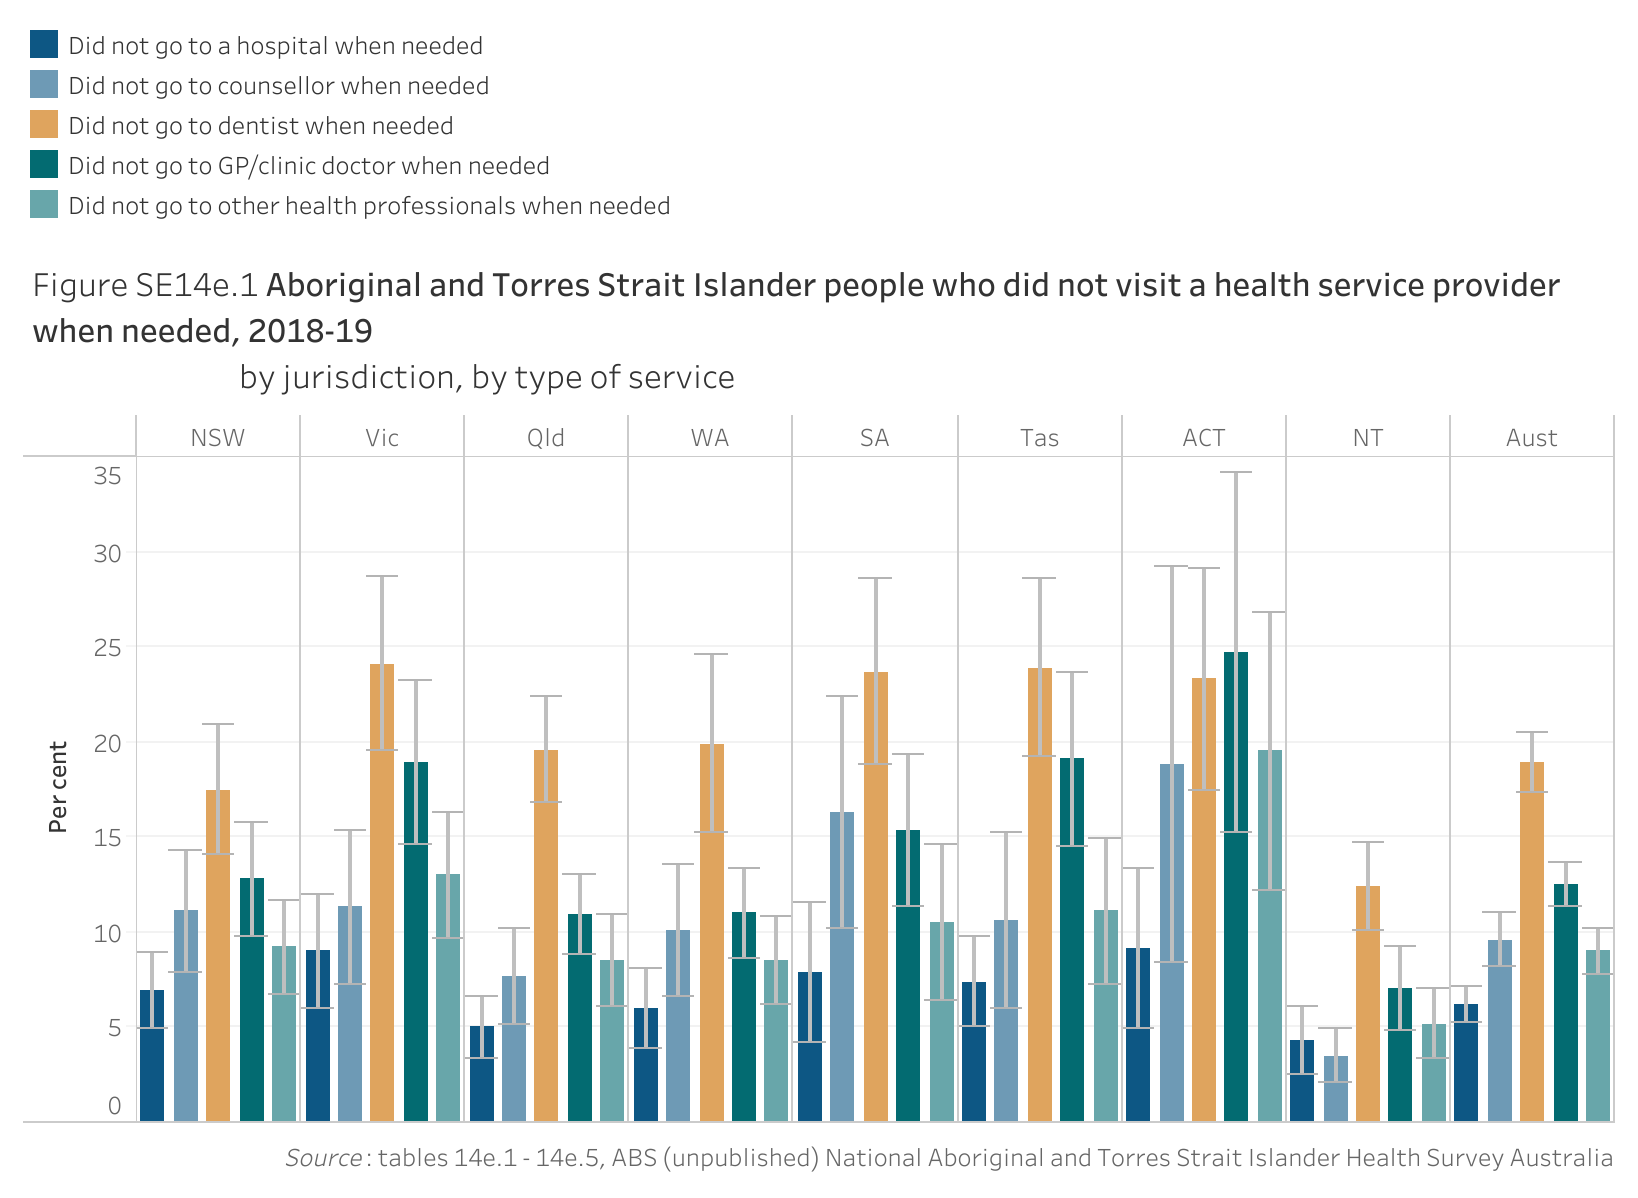 Figure SE14e.1. Bar chart showing the proportion of Aboriginal and Torres Strait Islander people who did not visit a health service provider when needed in 2018-19, by jurisdiction and by type of service. Data table of figure SE14e.1 is below.